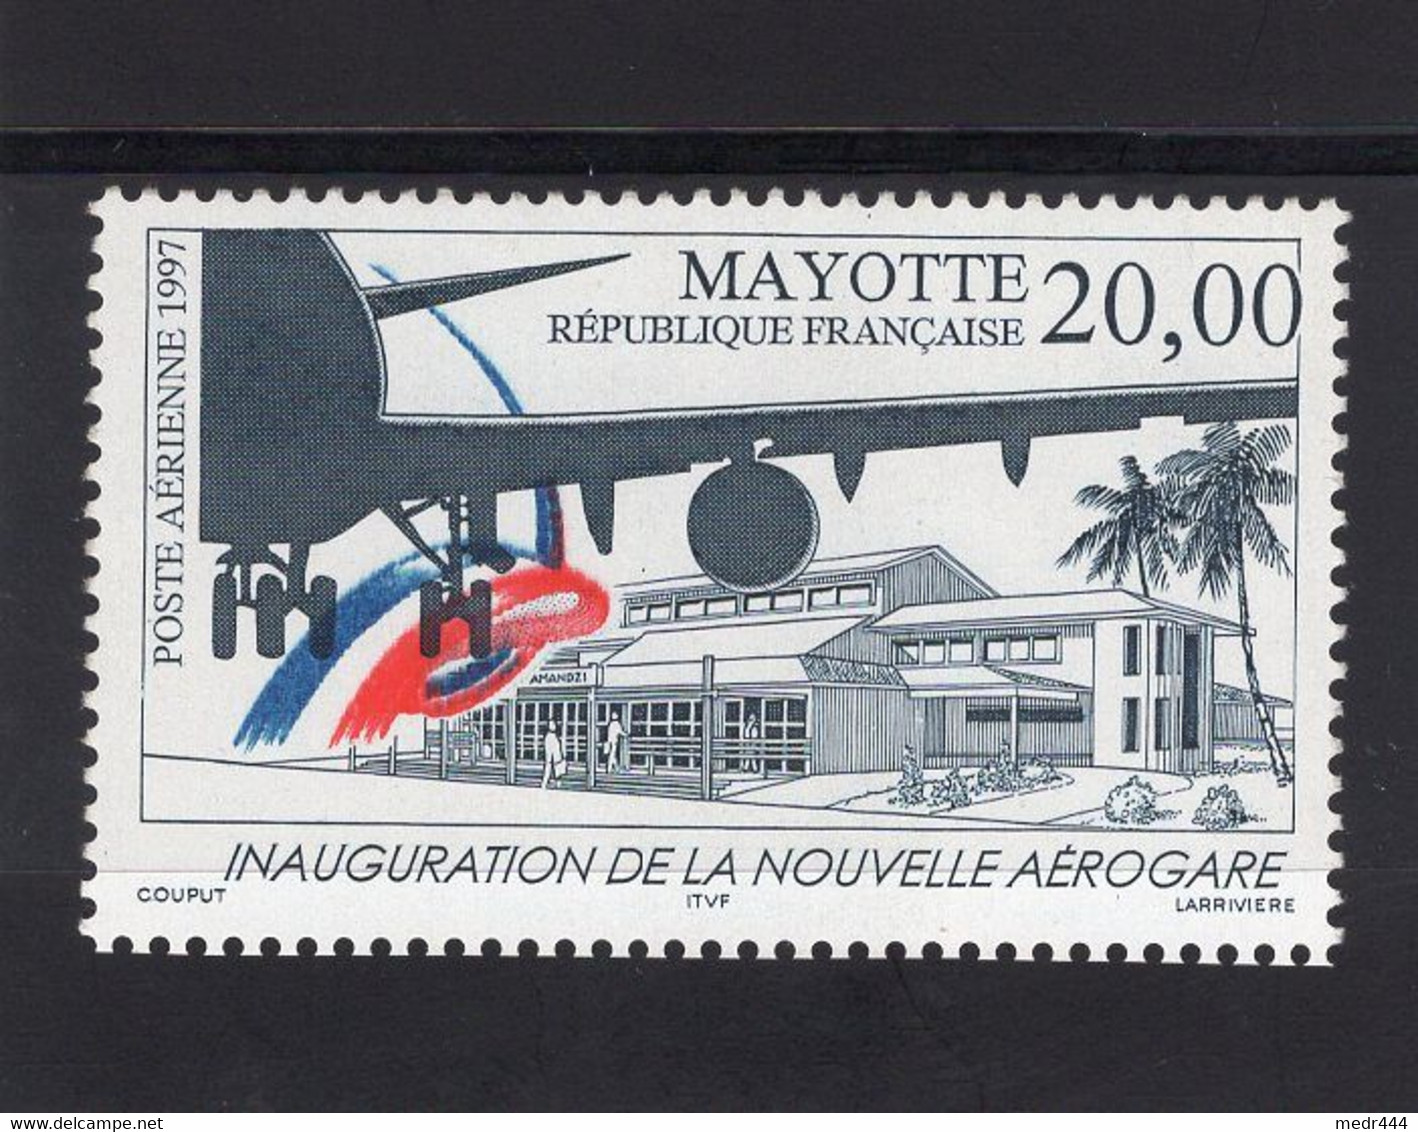 Mayotte 1997 - Airmail - Inauguration Of The New Airport - Stamp - Complete Set - MNH** Excellent Quality - Poste Aérienne